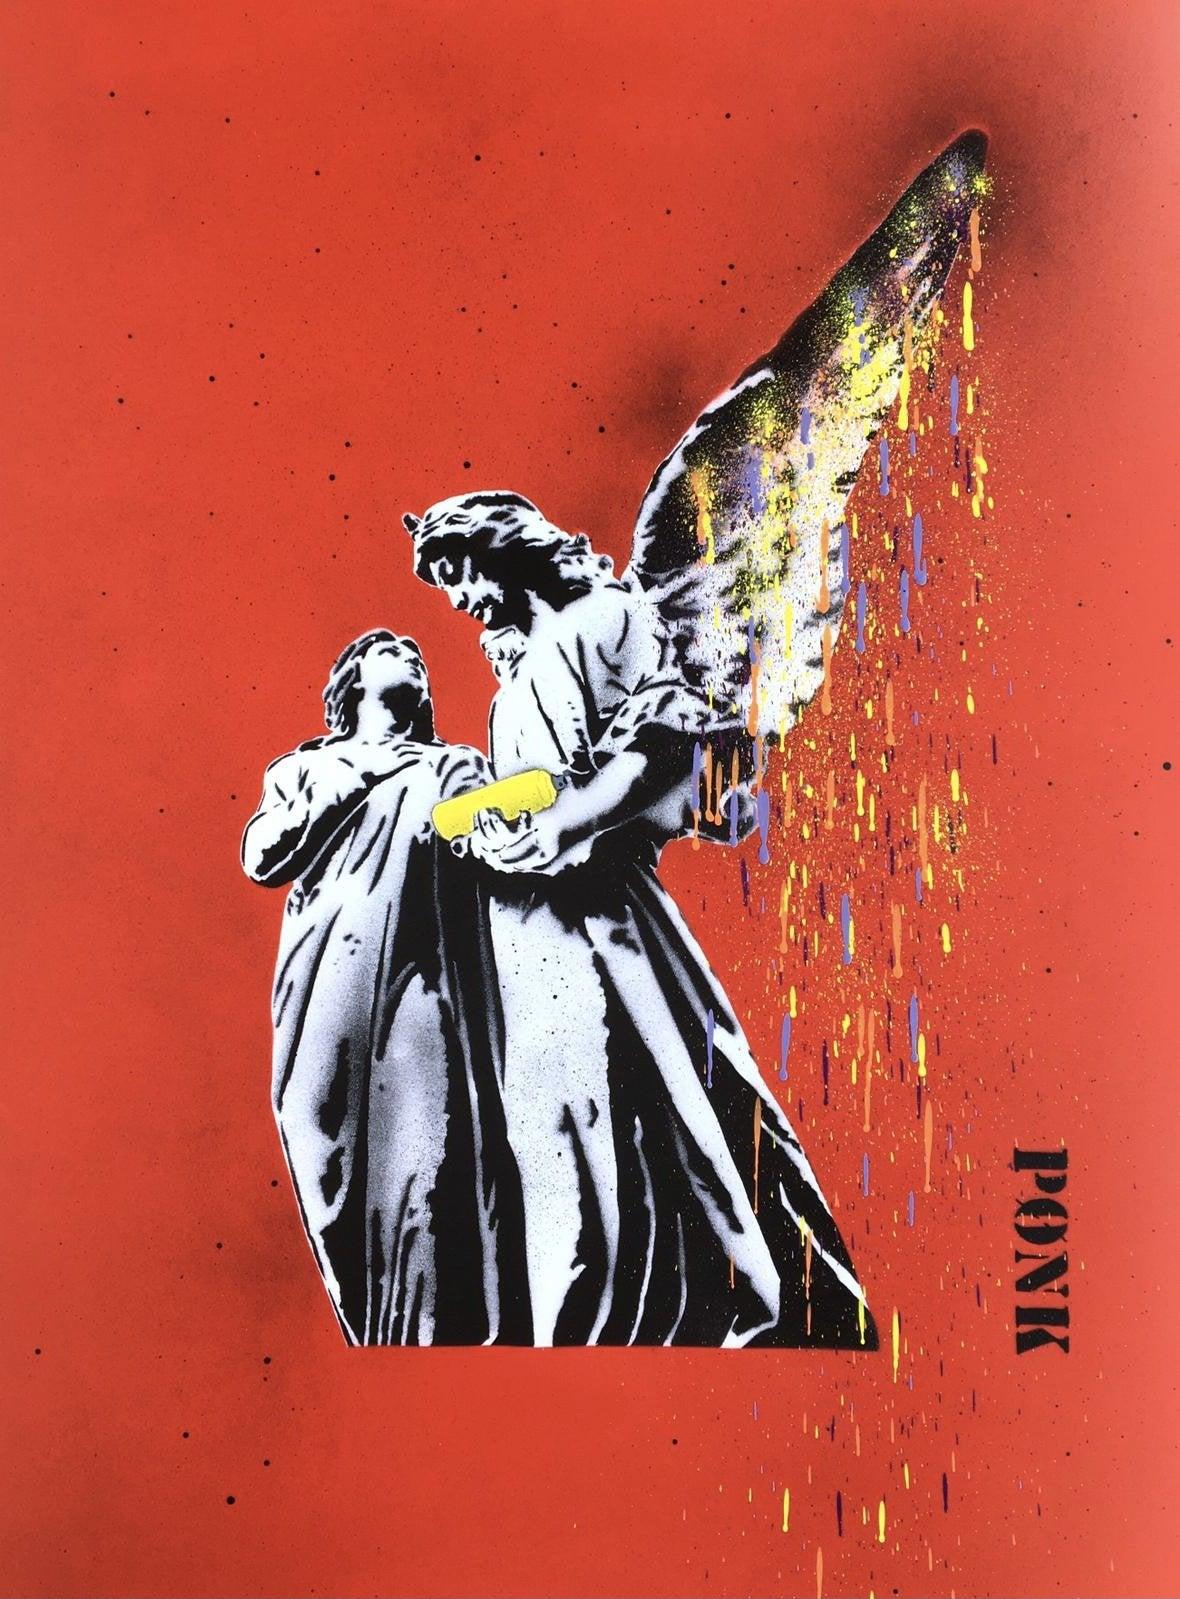 Spray for Love - 1/1 (Red) by PONK (Street Art), 2021